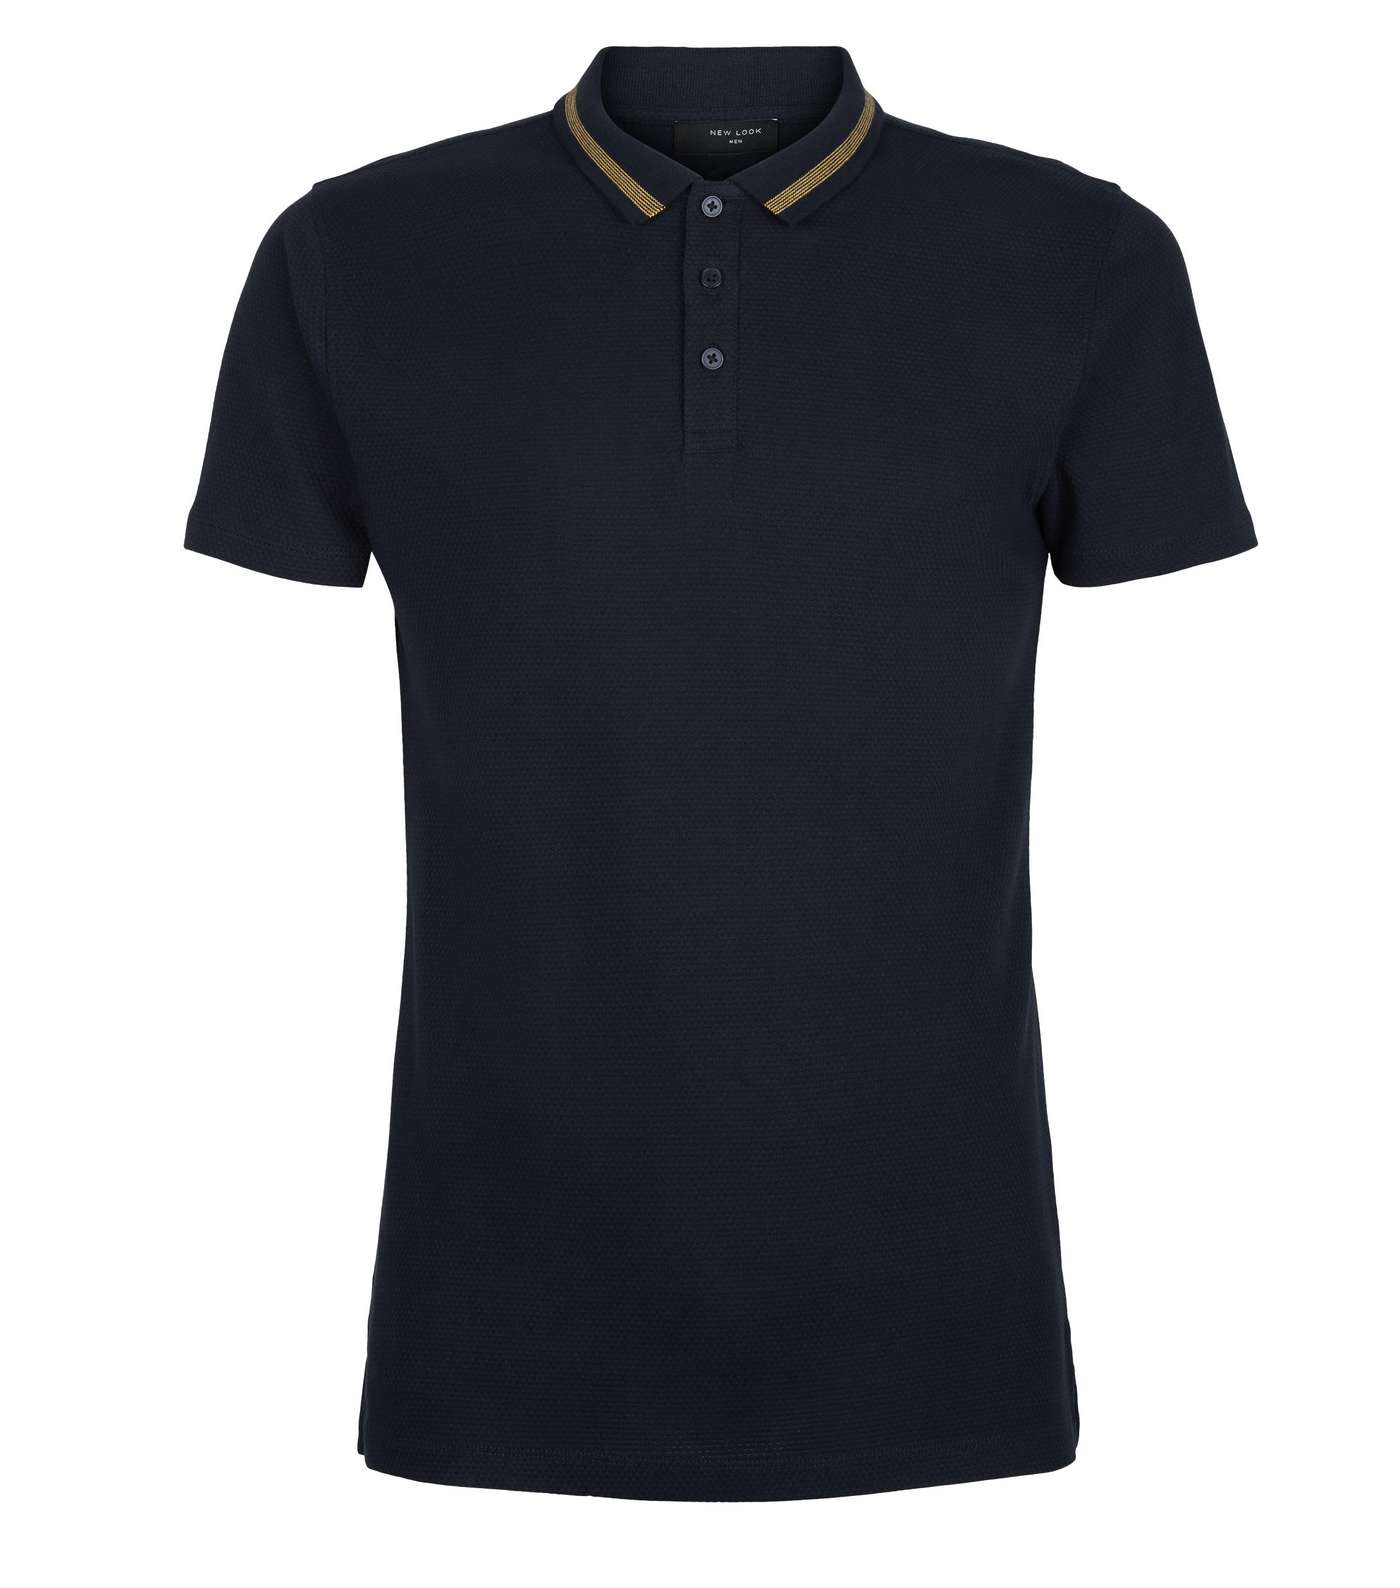 Navy Stripe Collar Muscle Fit Polo Shirt Image 4